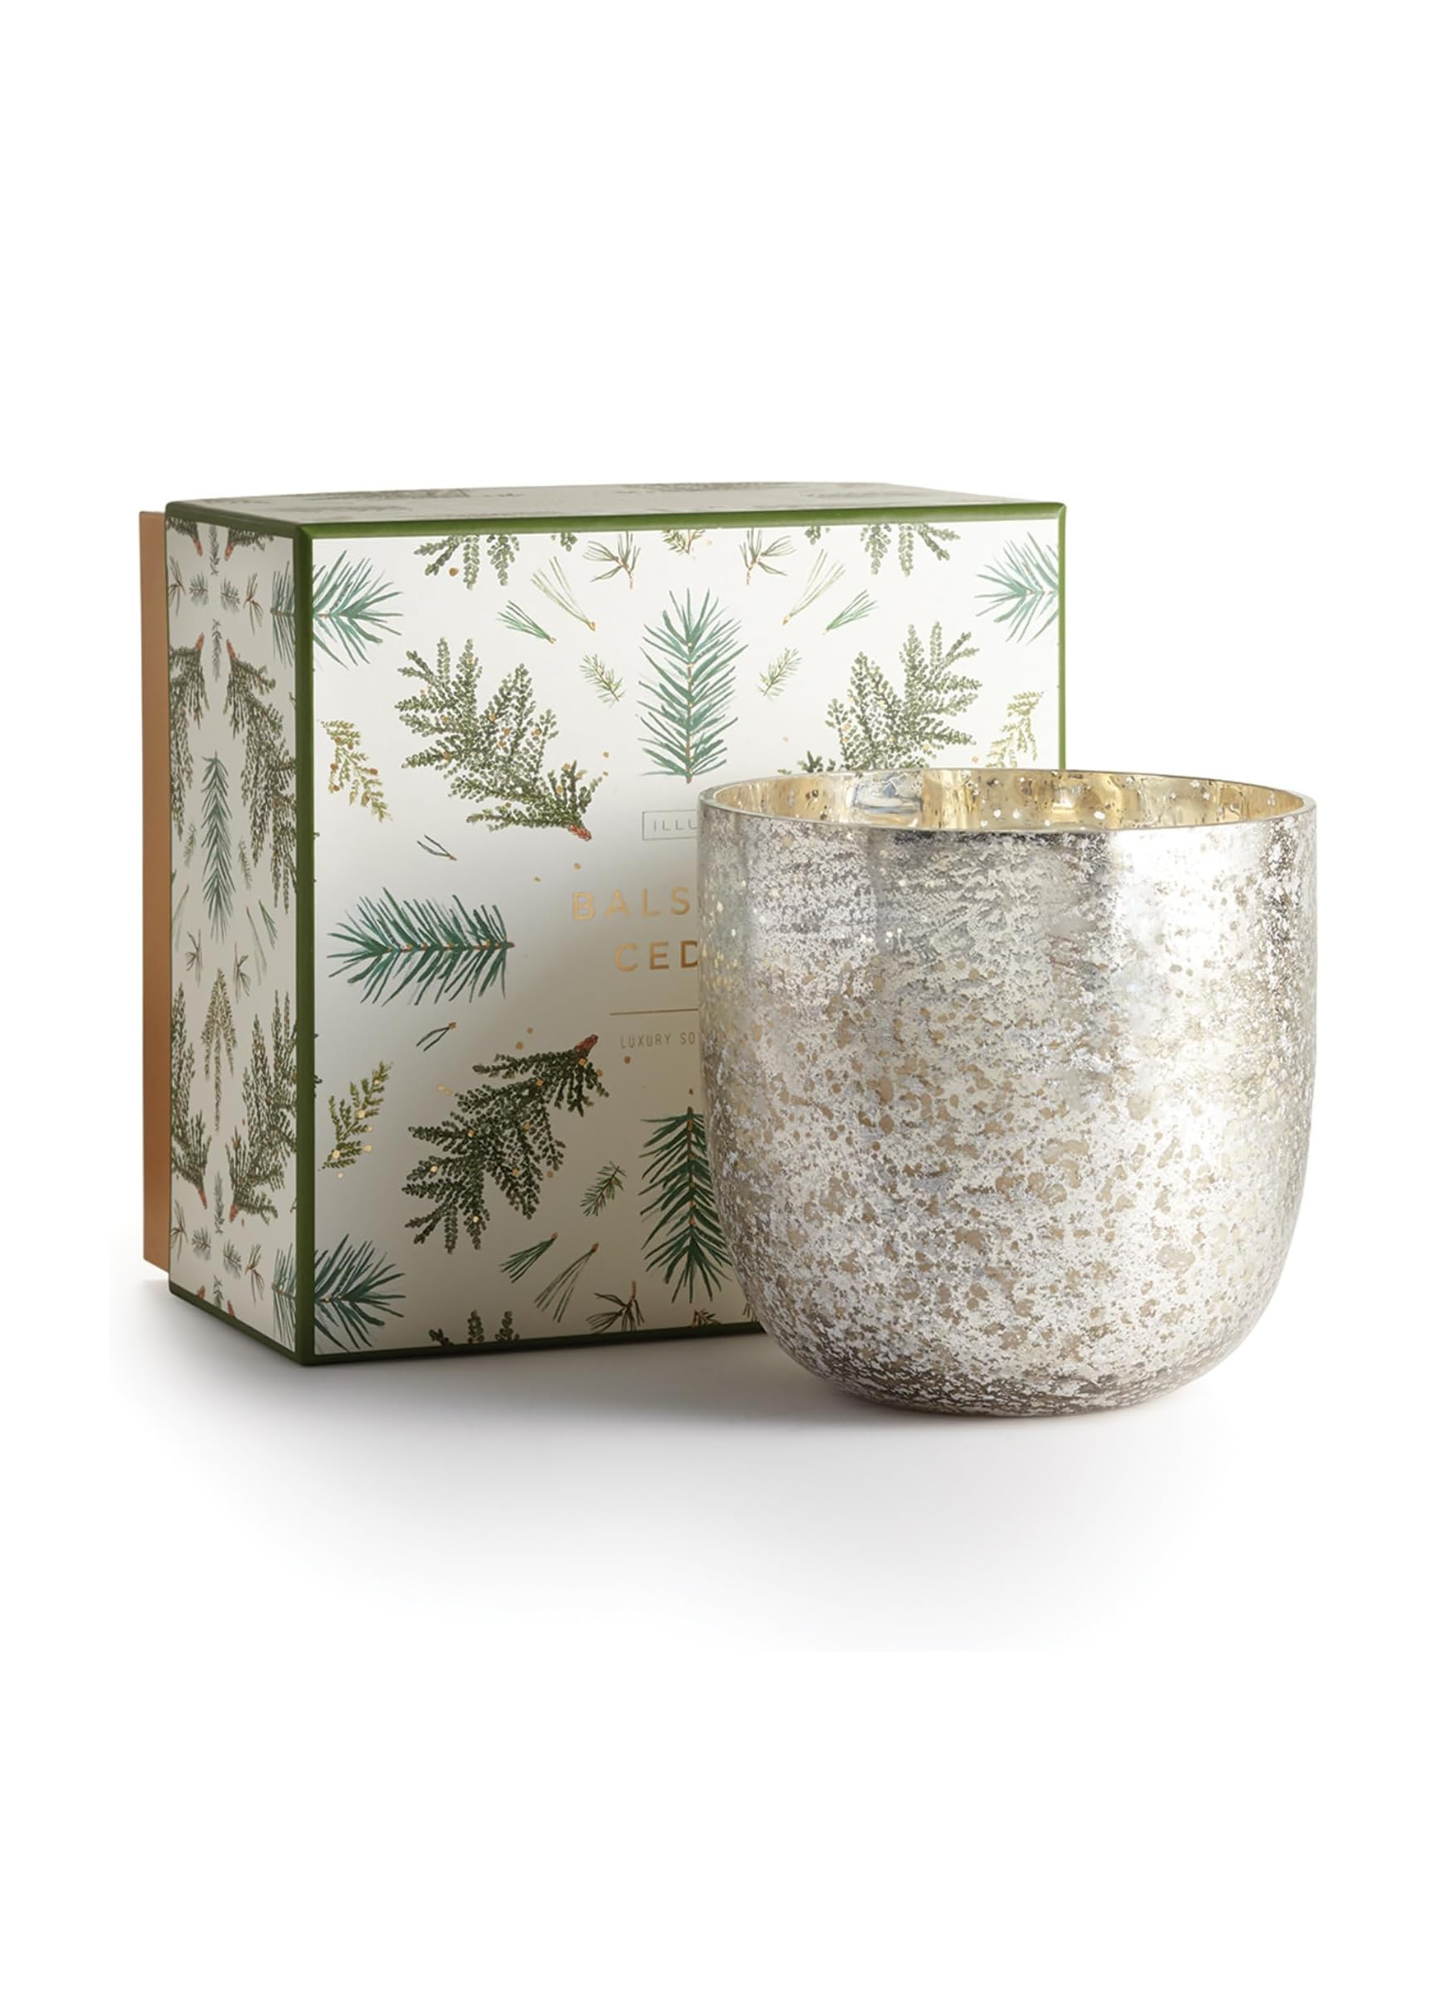 Balsam & Cedar Large Luxe Sanded Mercury Glass Candle